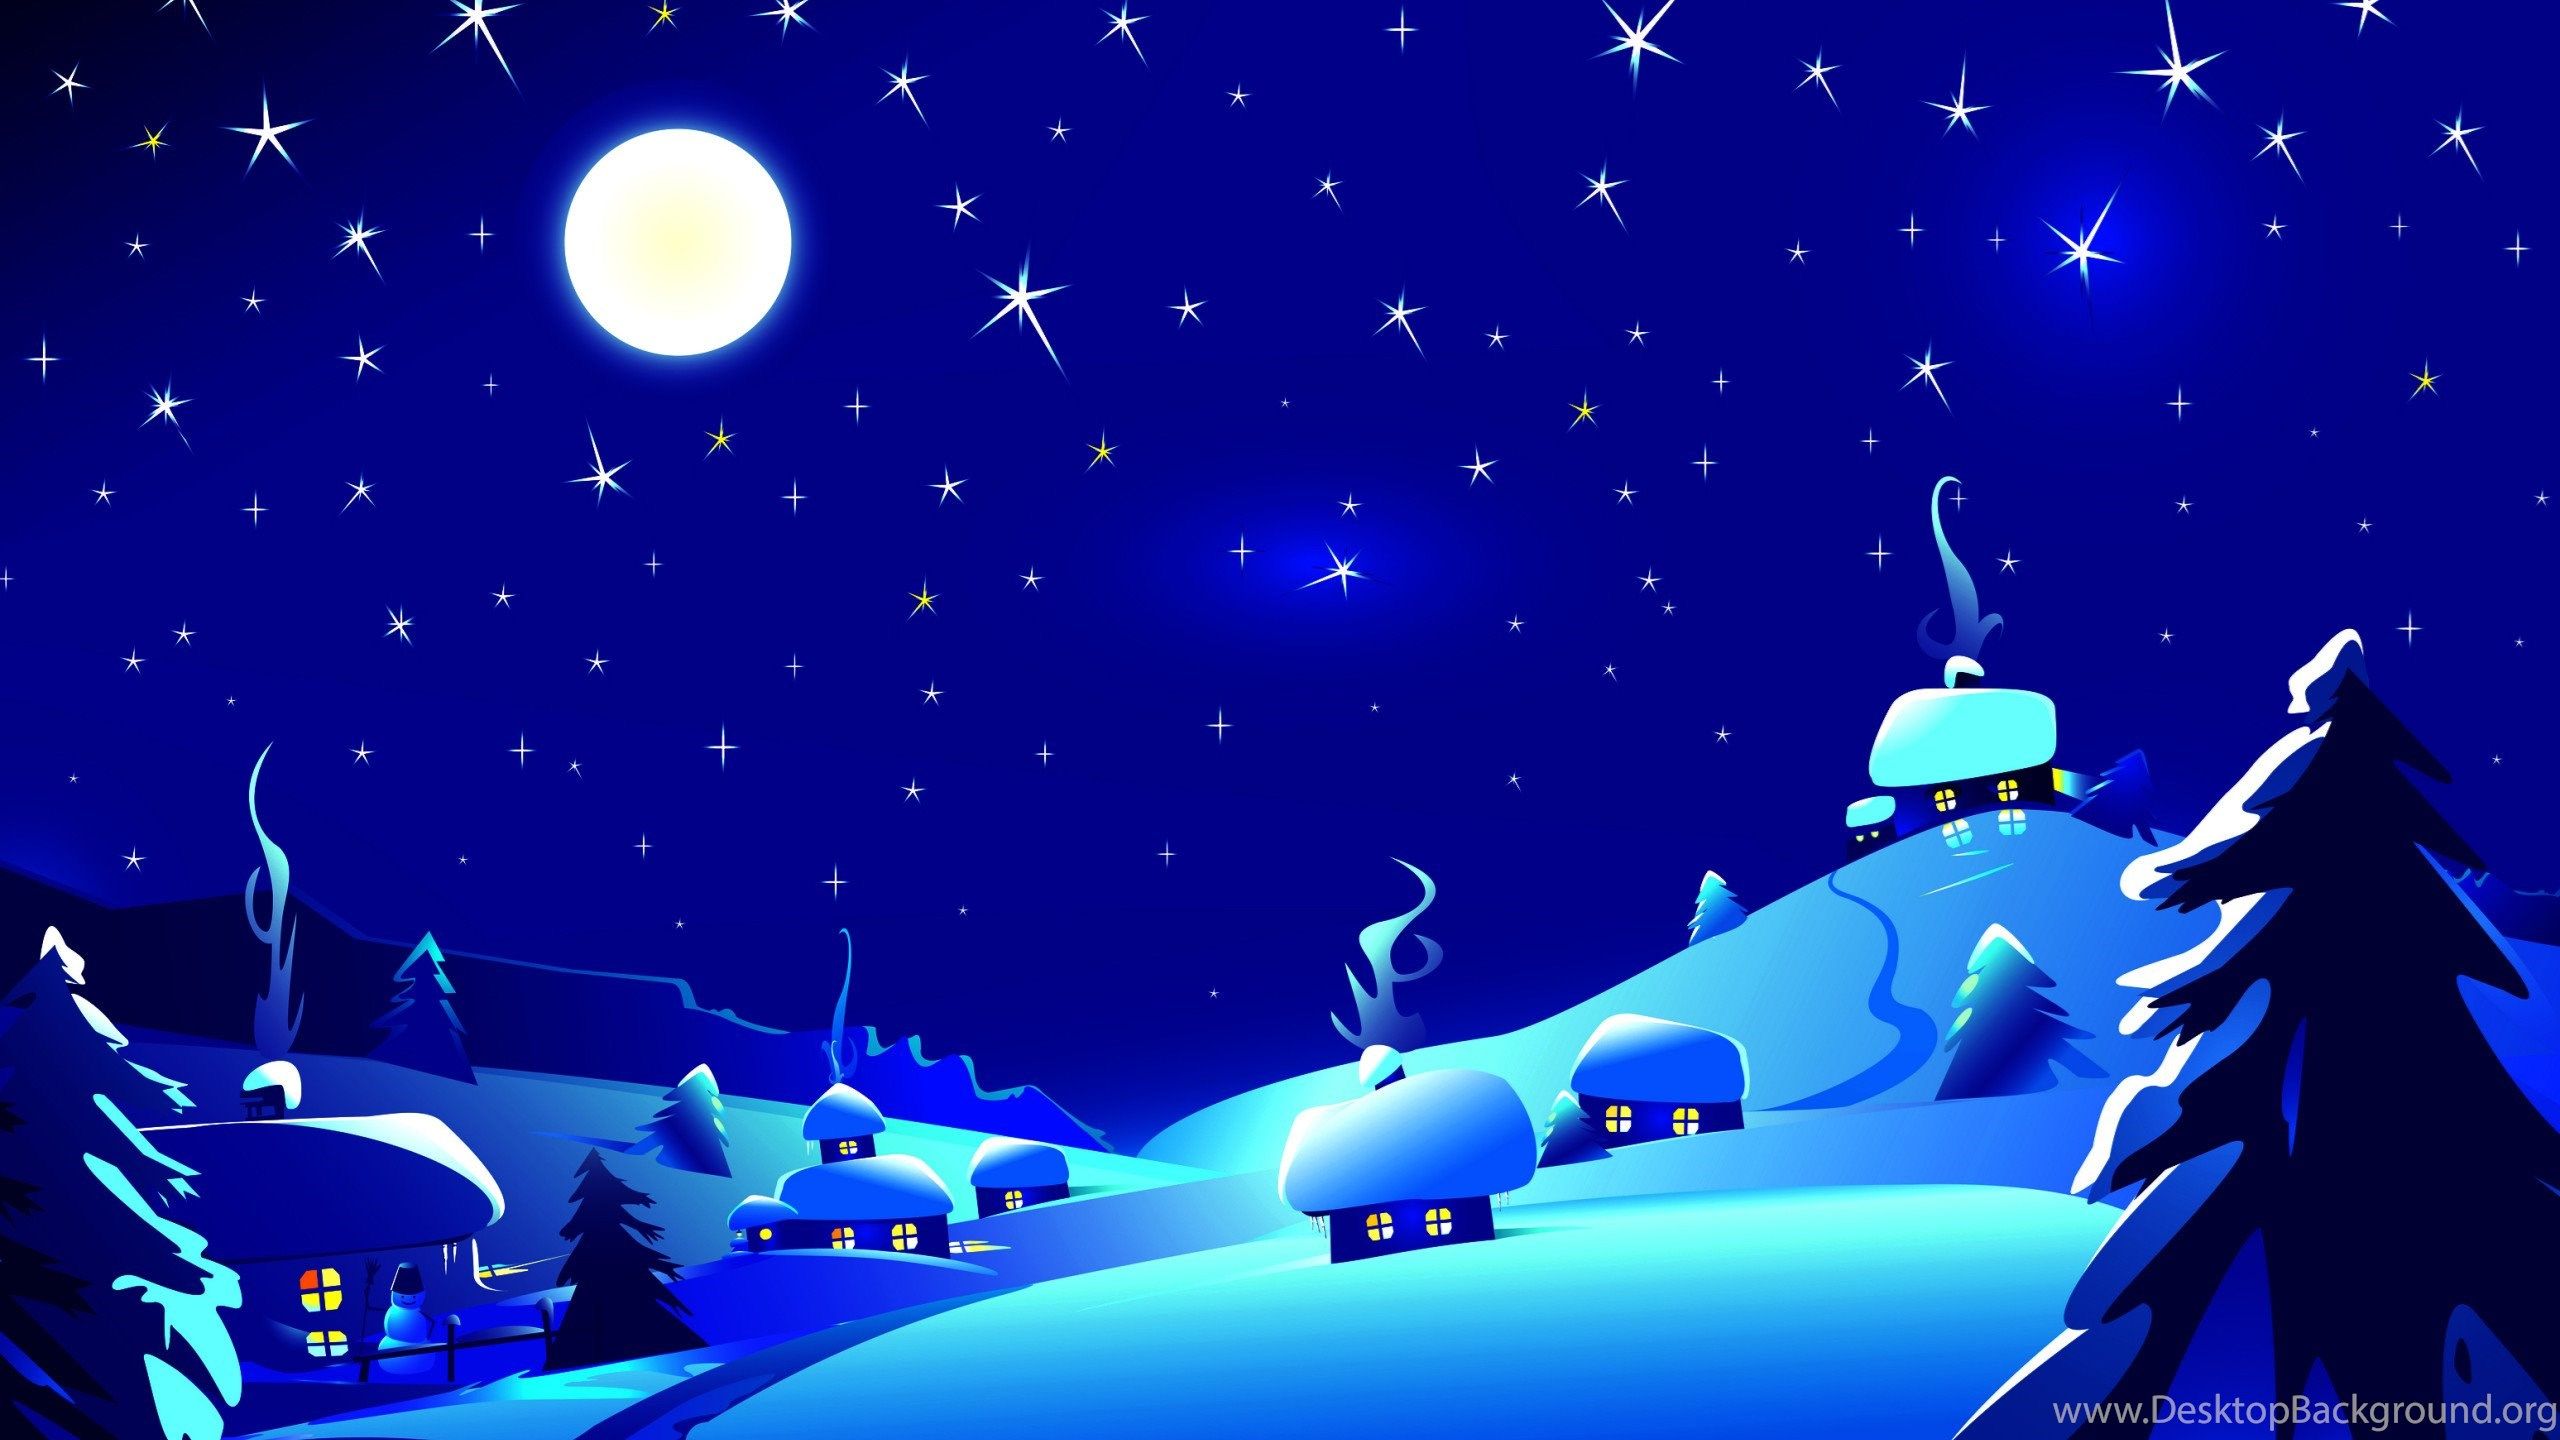 The Magic Of The Christmas Night Wallpaper Desktop Background